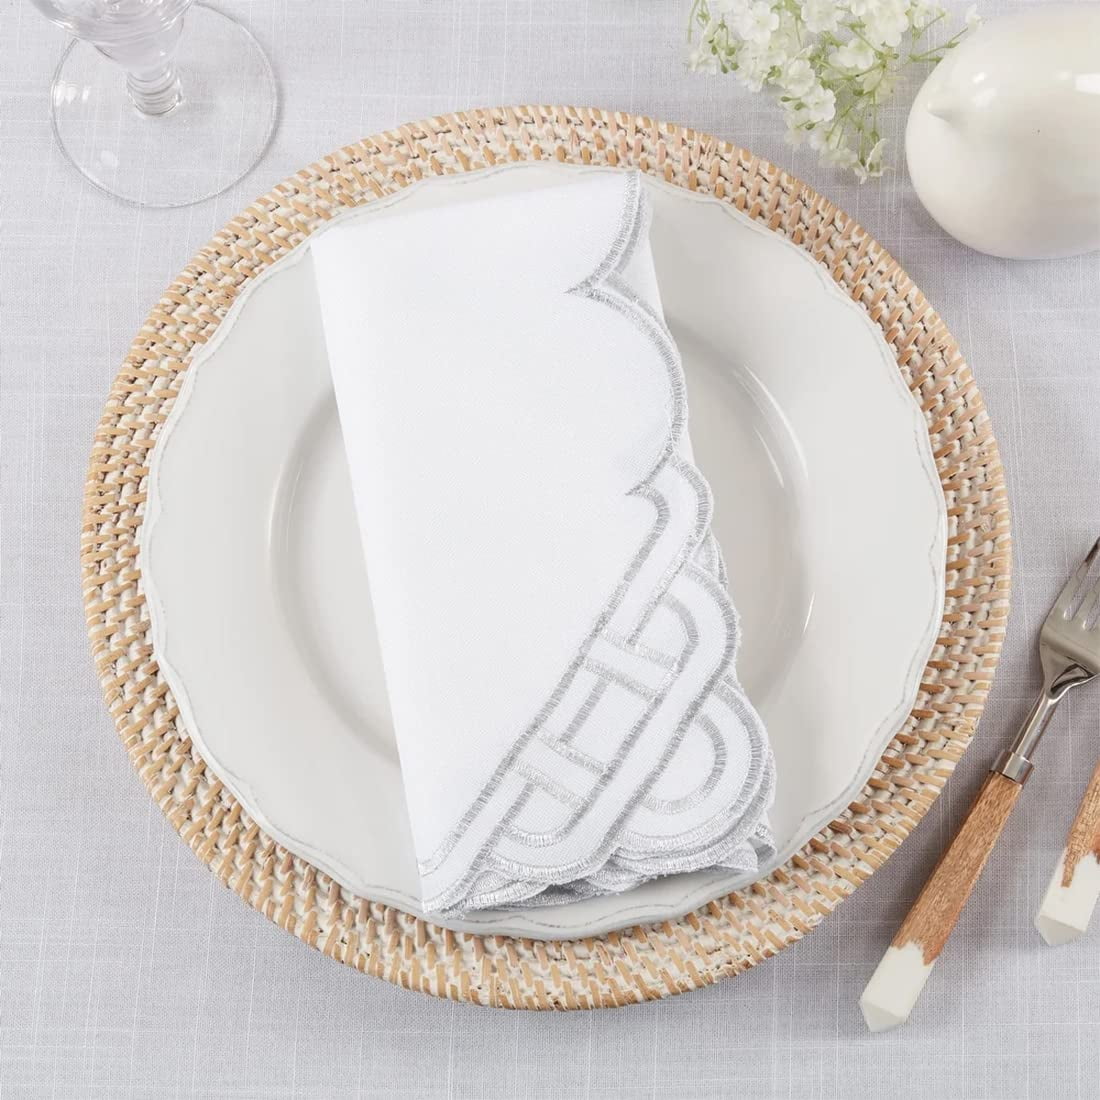 BEDDING CRAFT Set of 6 Lace White Cloth Dinner Napkins 100% Cotton - Soft  Durable Washable -Ideal for Events Wedding Christmas Thanksgiving